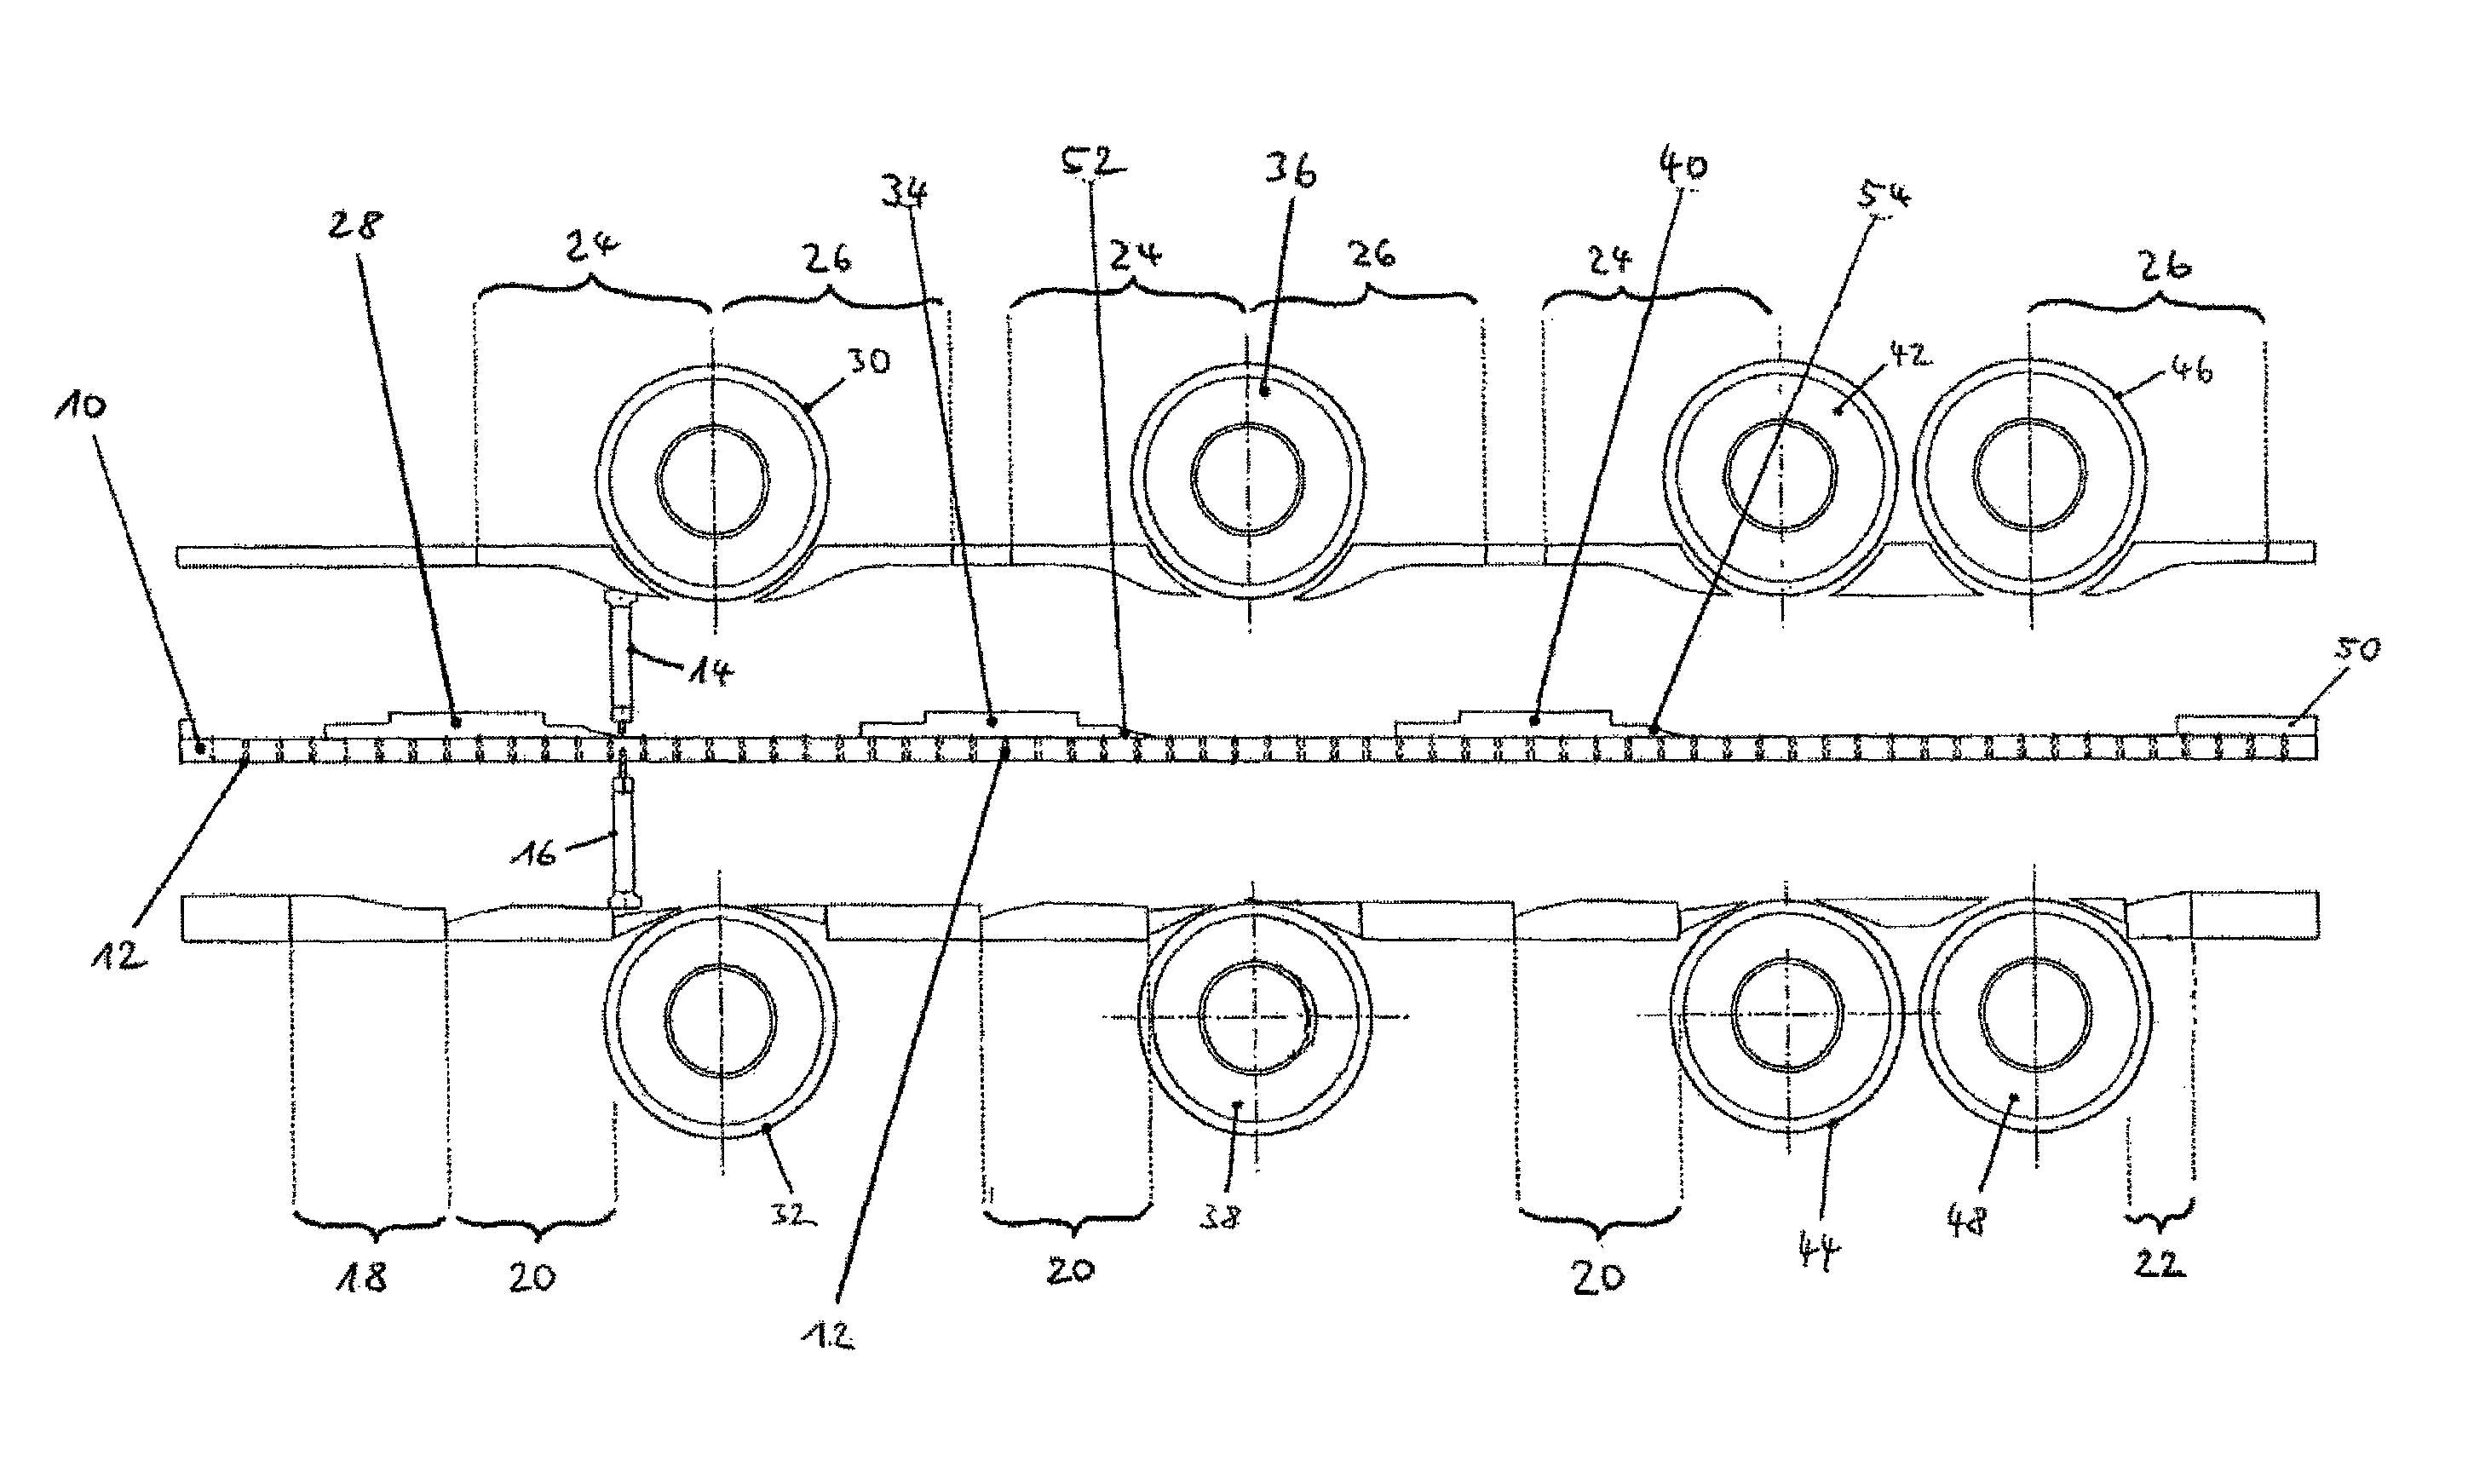 Method for testing multilayer tablets in a multiple rotary press, the tested tablets produced under normal operation, with m layers pressed and the m+1 layer suctioned off and the tablet fed to the testing station